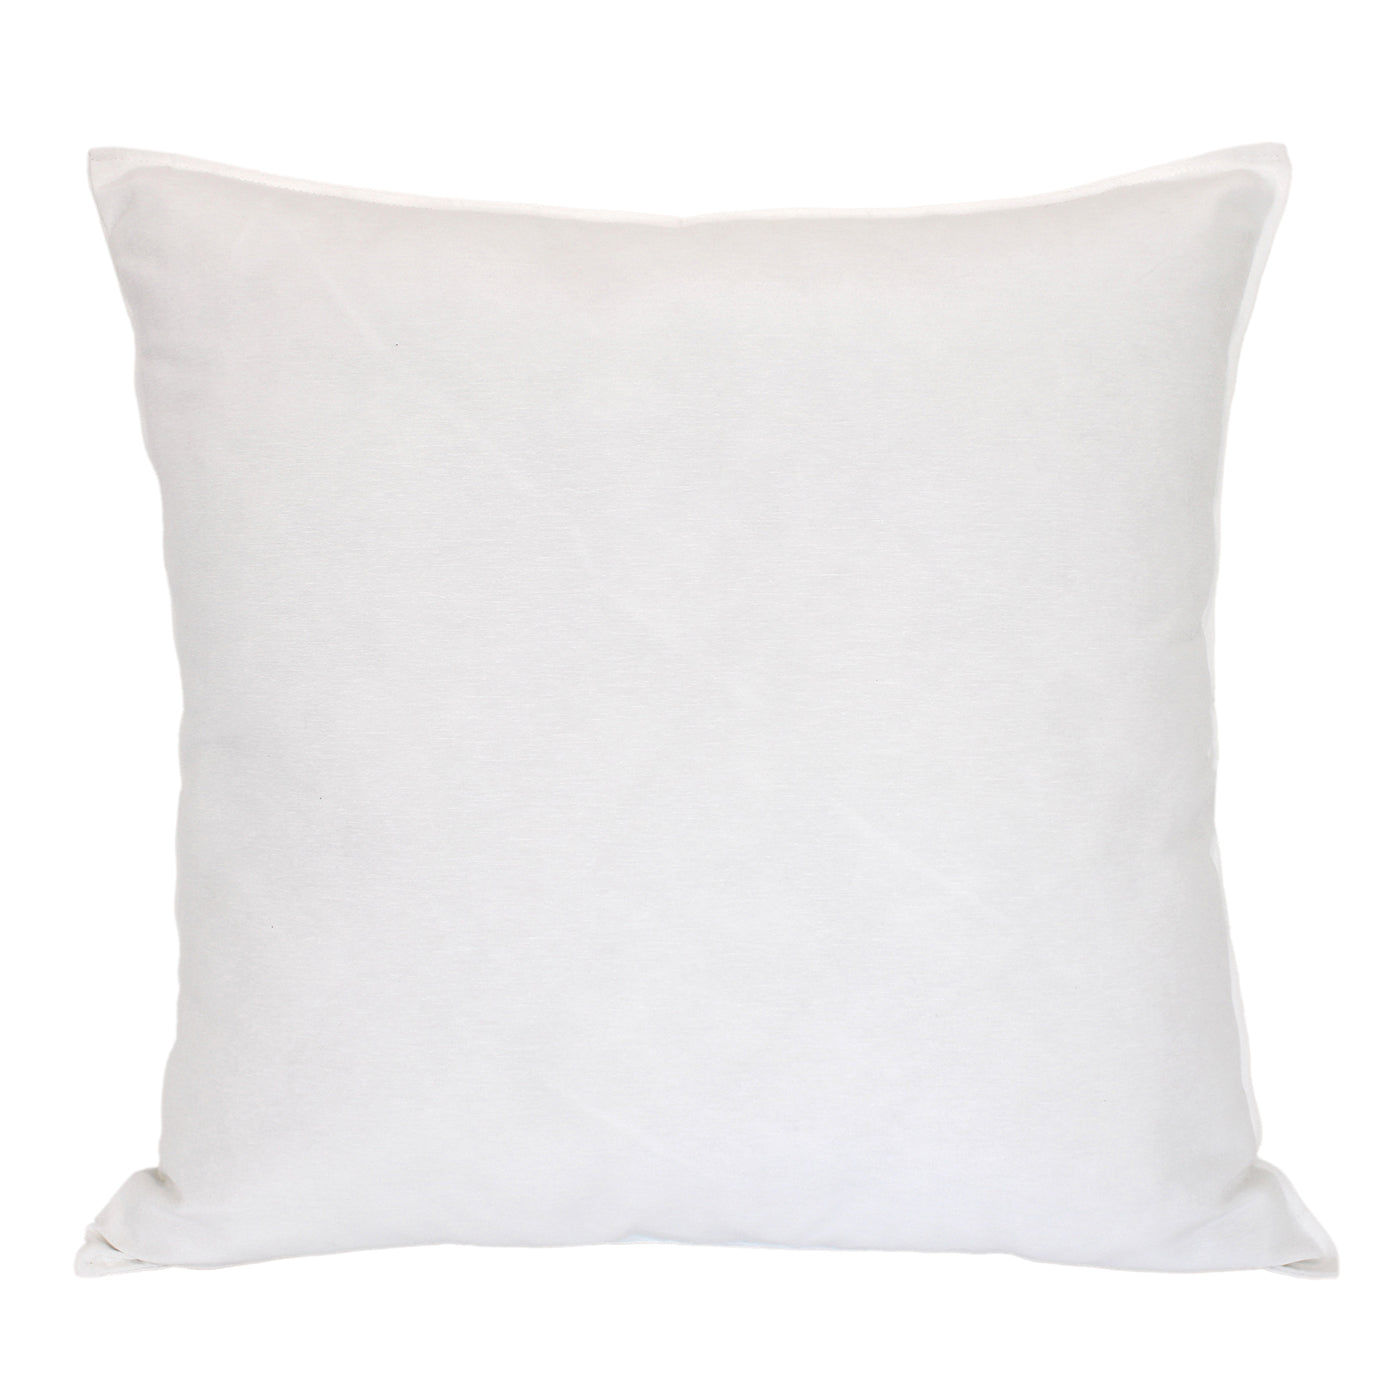 White Set of 2 Large Square Cushions - Main view